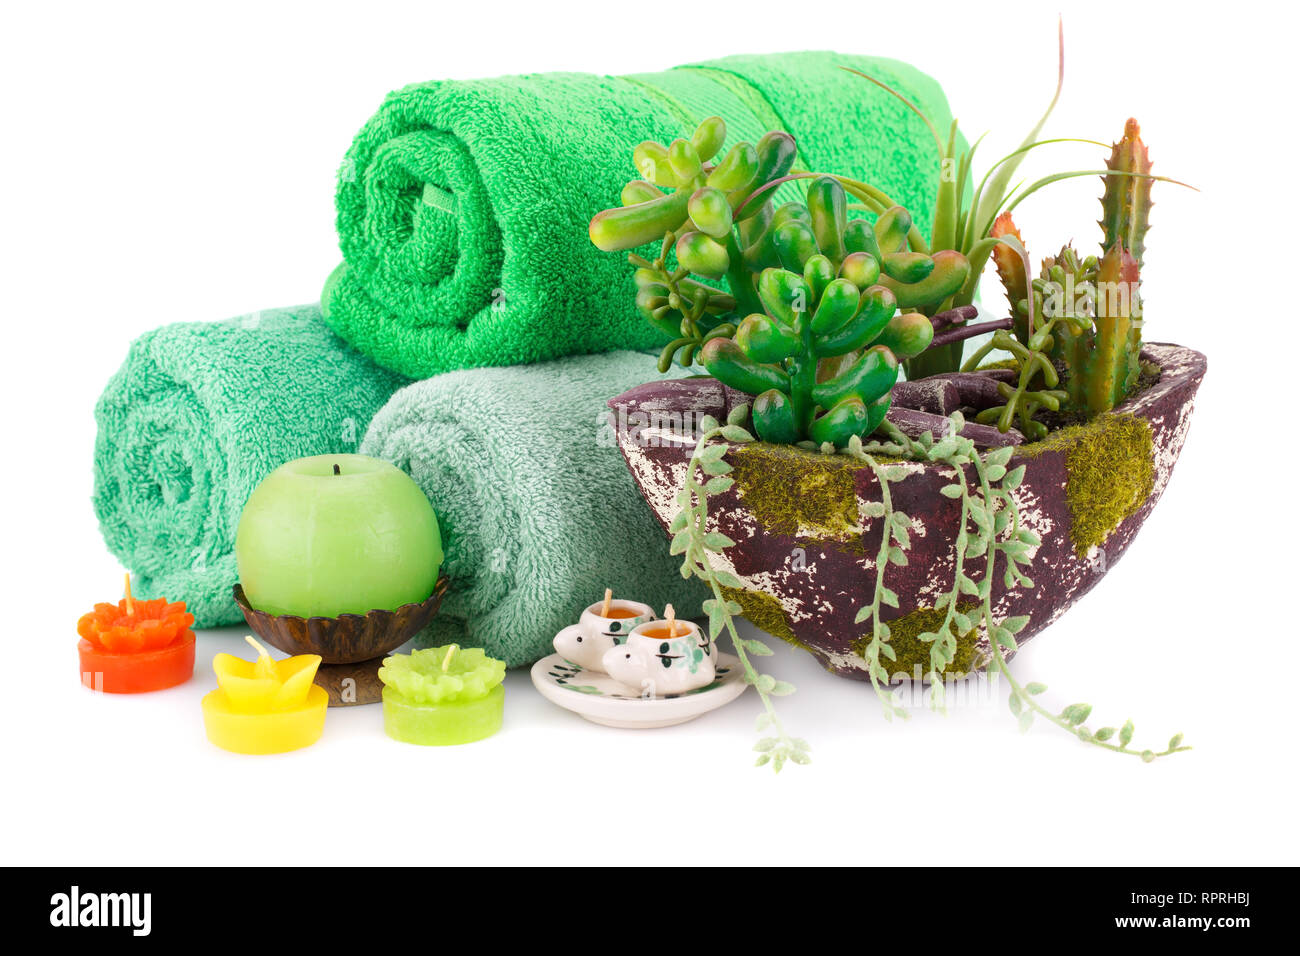 Spa set with towels, candles and plant in vase isolated on white background. Stock Photo